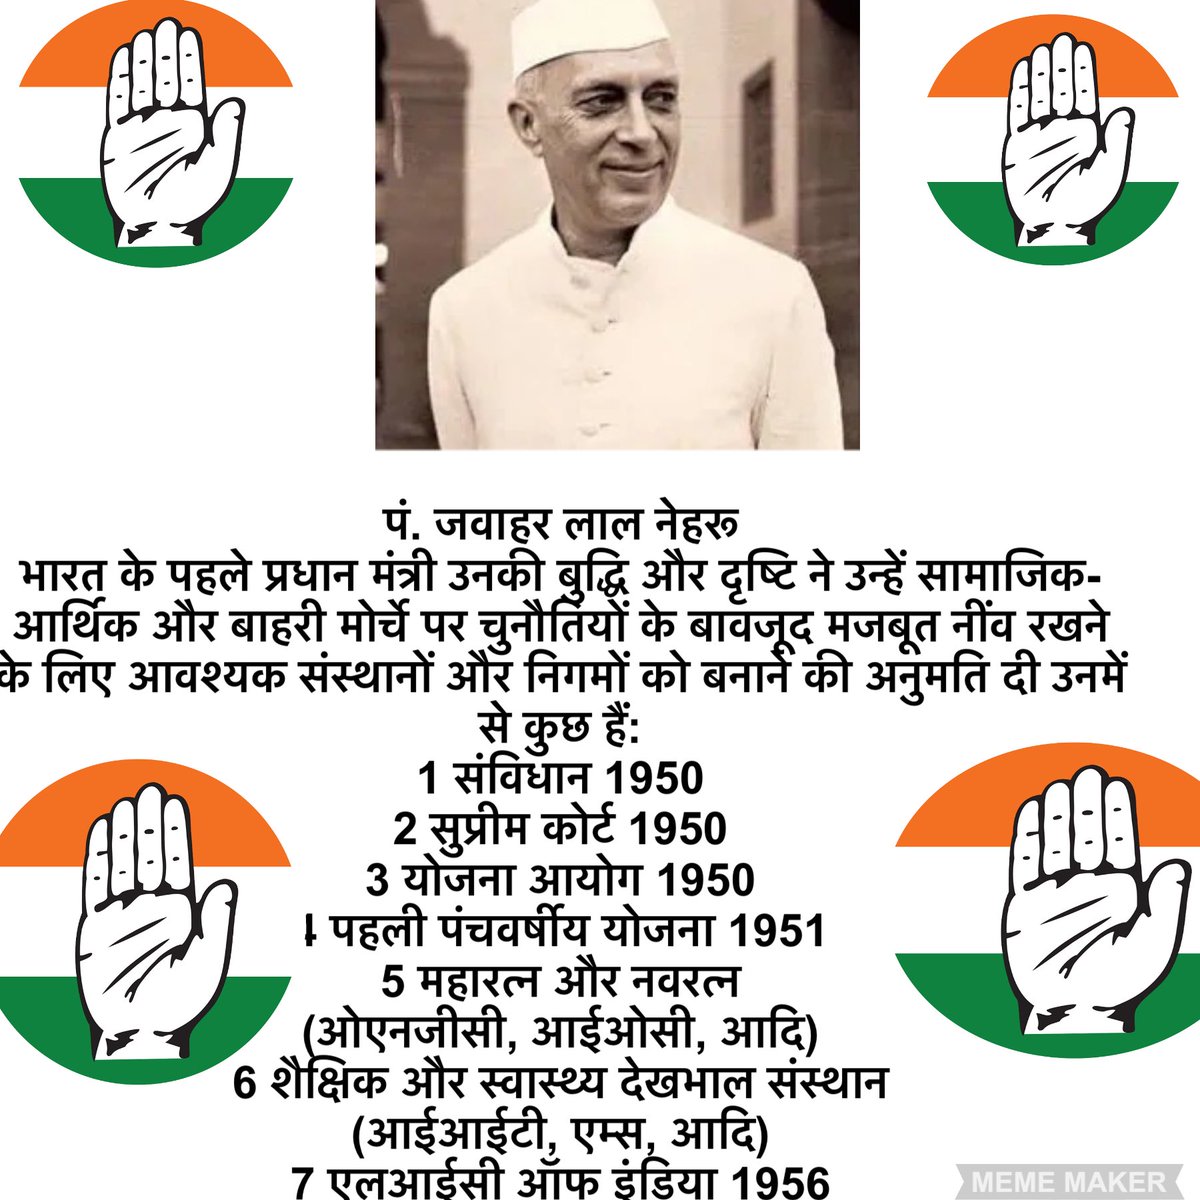 #DidYouKnow 
Only #Facts No #Propaganda
#MustRead
Especially #Youth who hv been misled by fake propaganda run for  decades👇
Inimitable contribution of our 1st Prime Minister Pt.Jawahar Lal Nehru who laid strong foundation in building Modern India of Today
#55Years_with_Congress